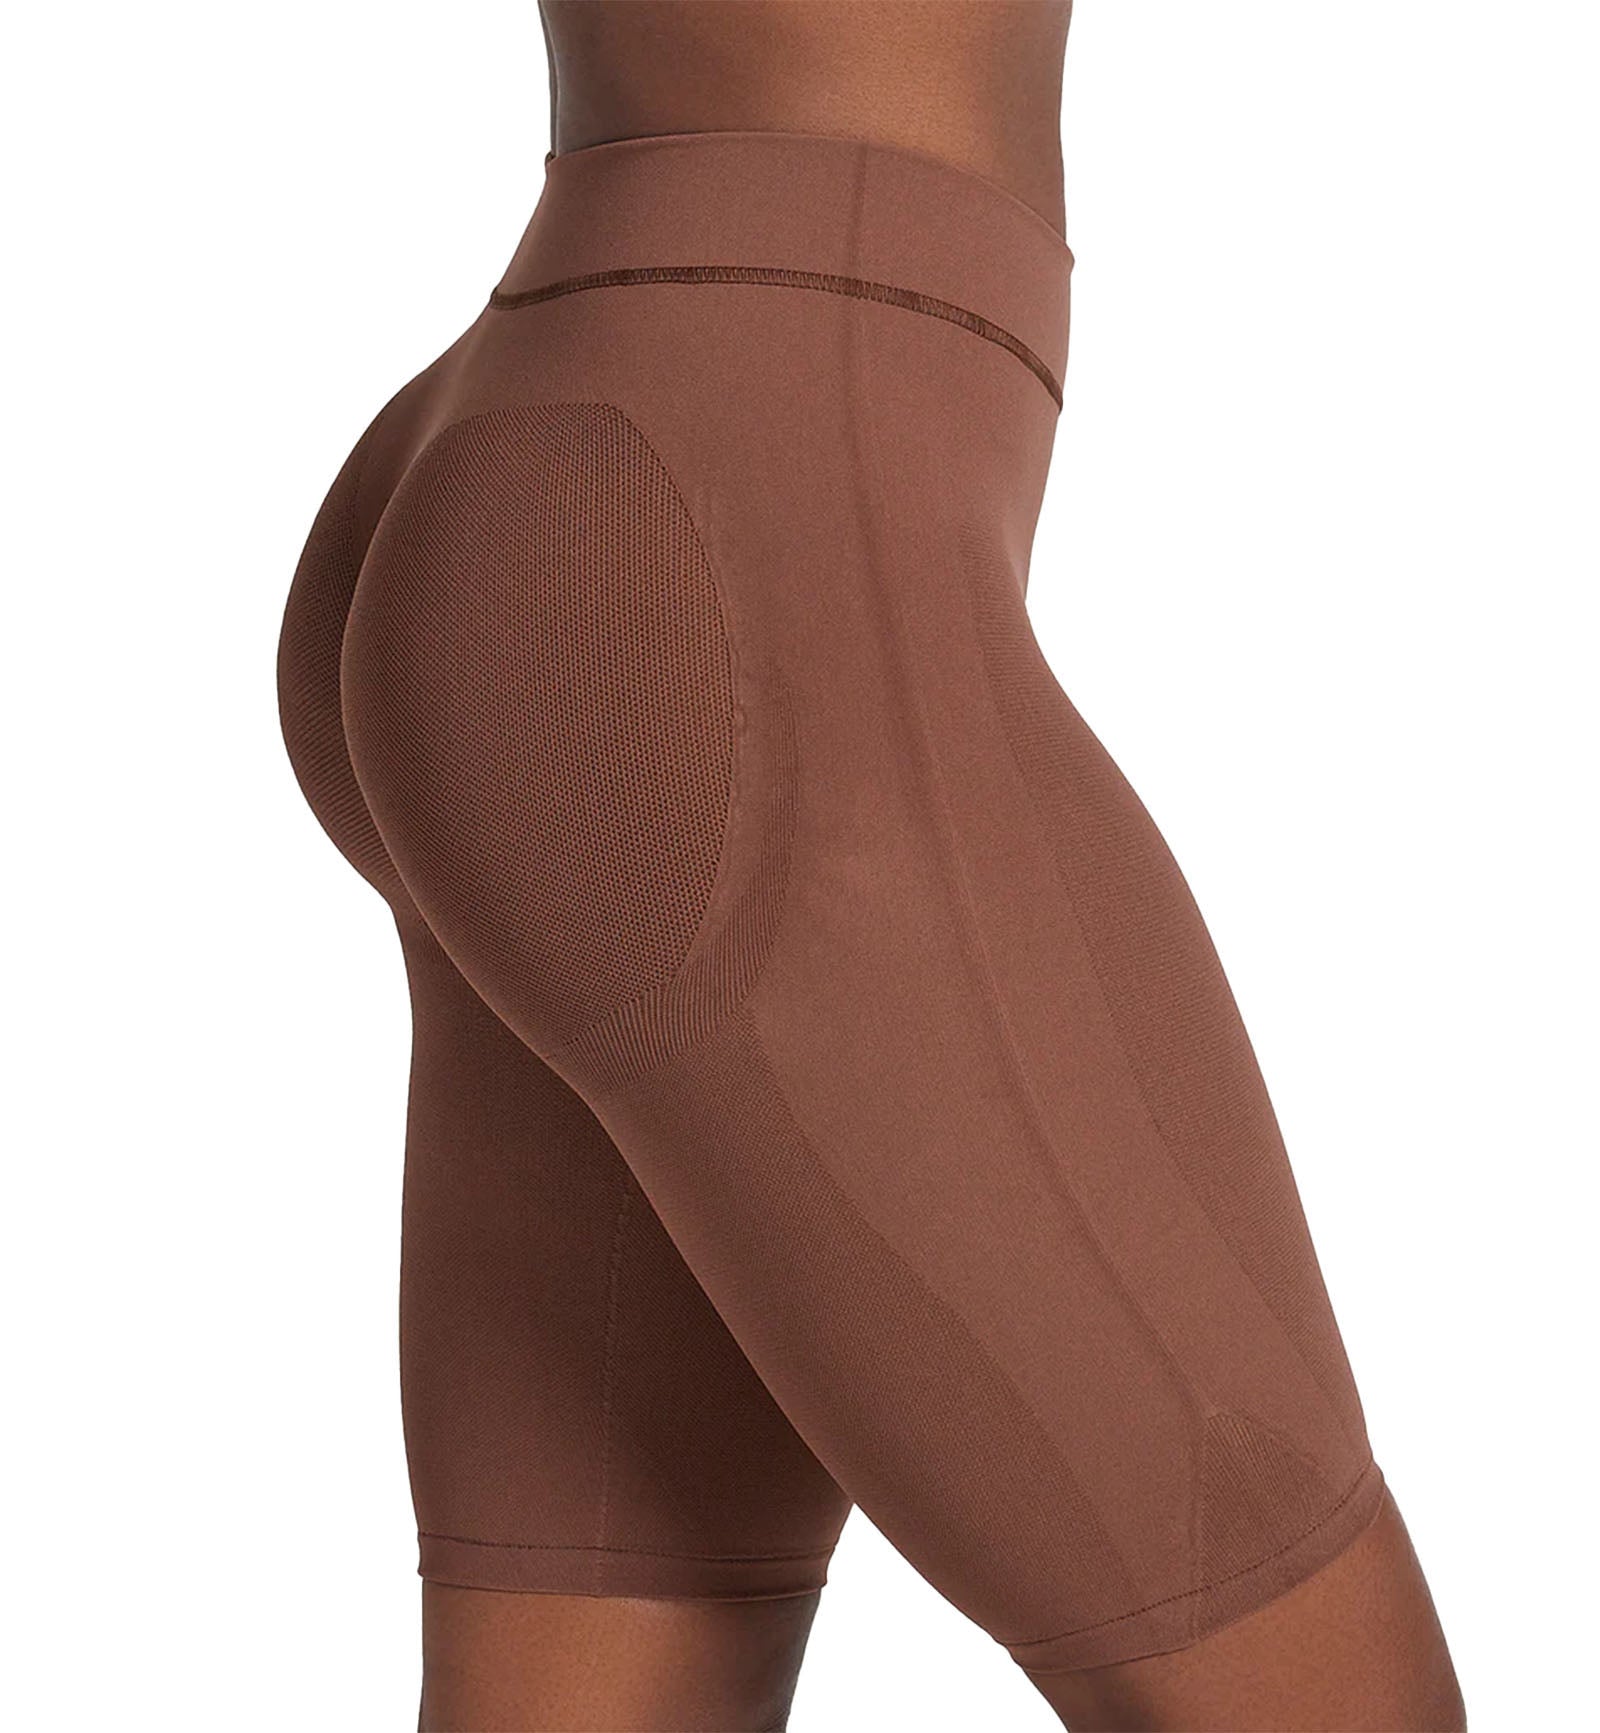 Leonisa Well-Rounded Invisible Butt Lifter Shaper Short (012778),S/M,Brown - Brown,S/M